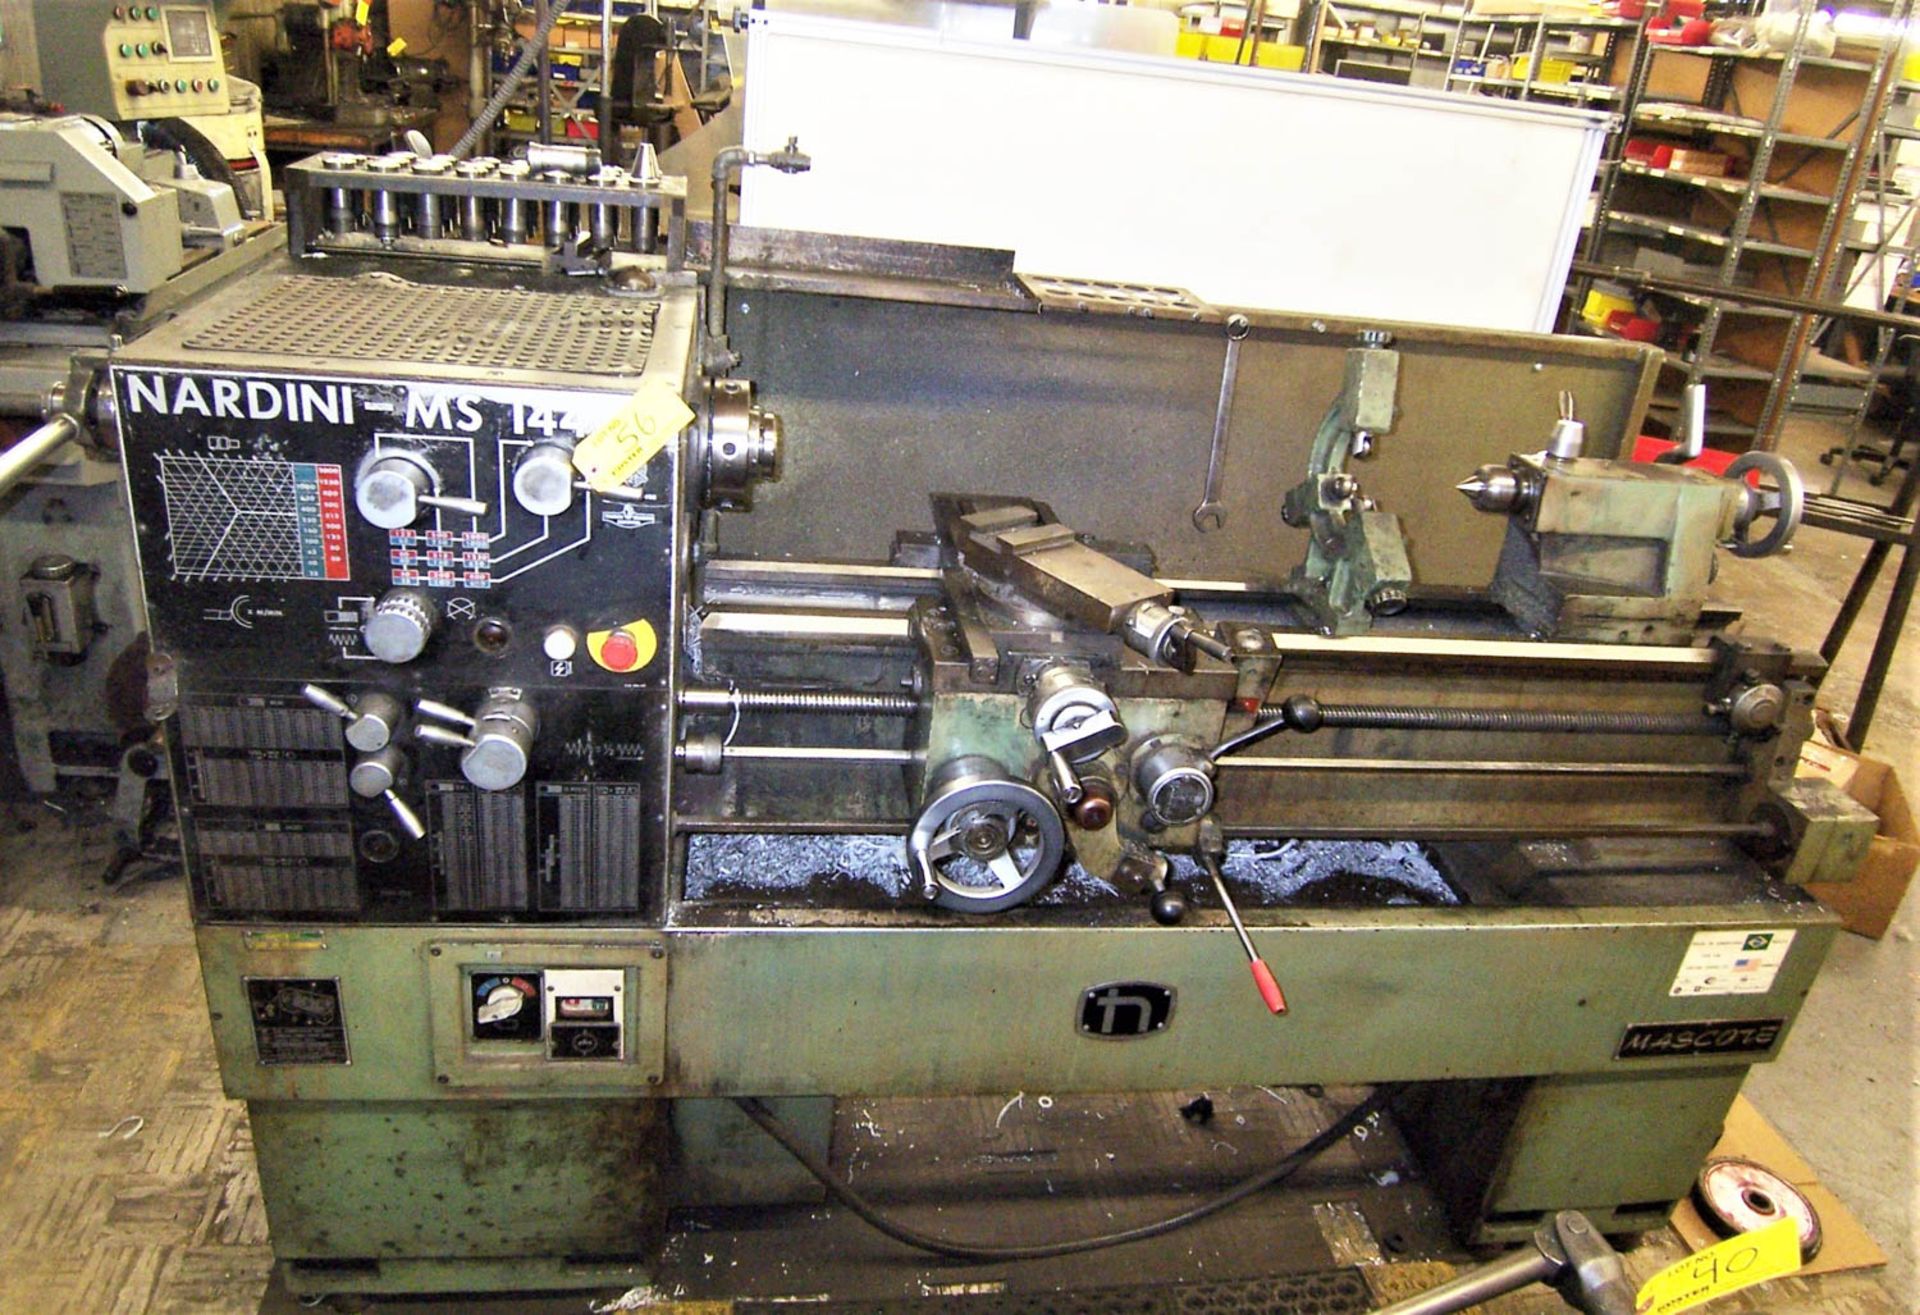 14" X X40" NARDINI MDL. MS1440E "MASCOTE" GAP BED LATHE, WITH 25-2000 RPM SPINDLE SPEEDS, INCH /